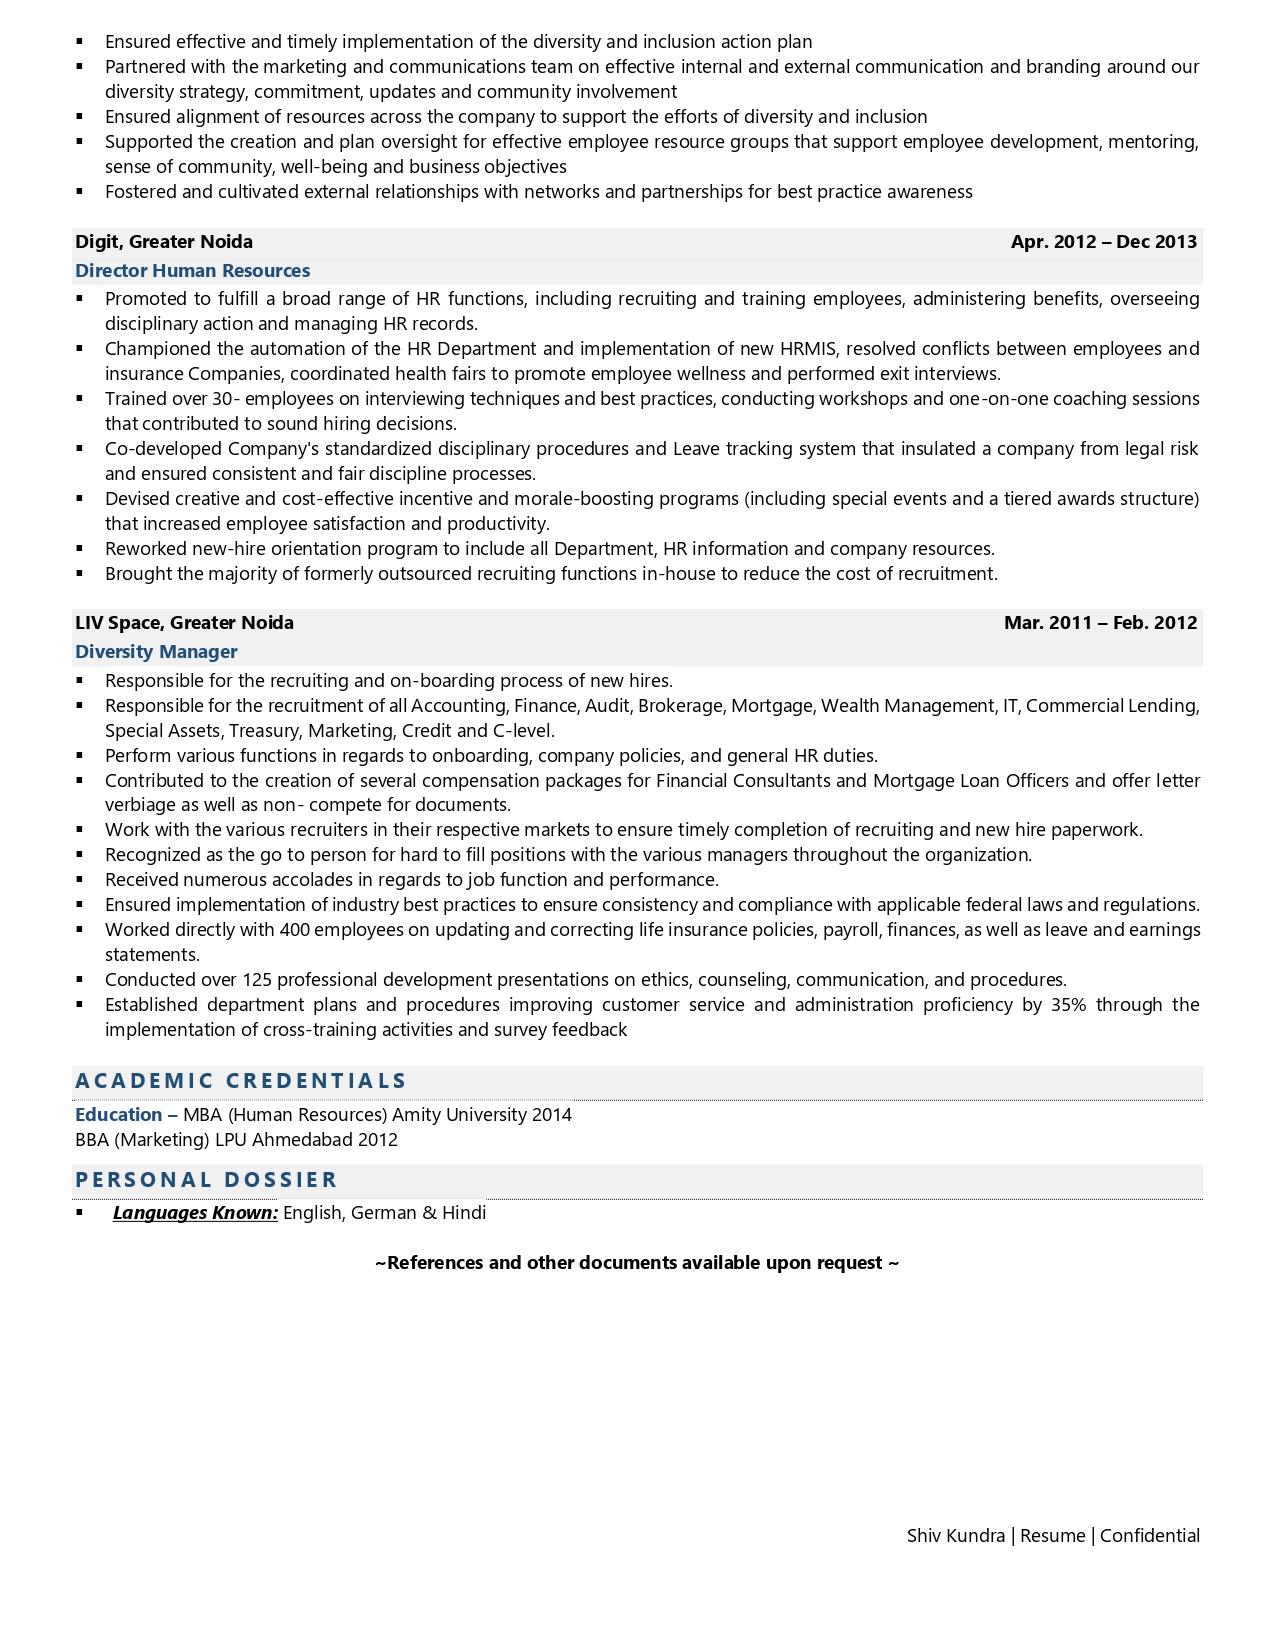 Chief Diversity Officer - Resume Example & Template